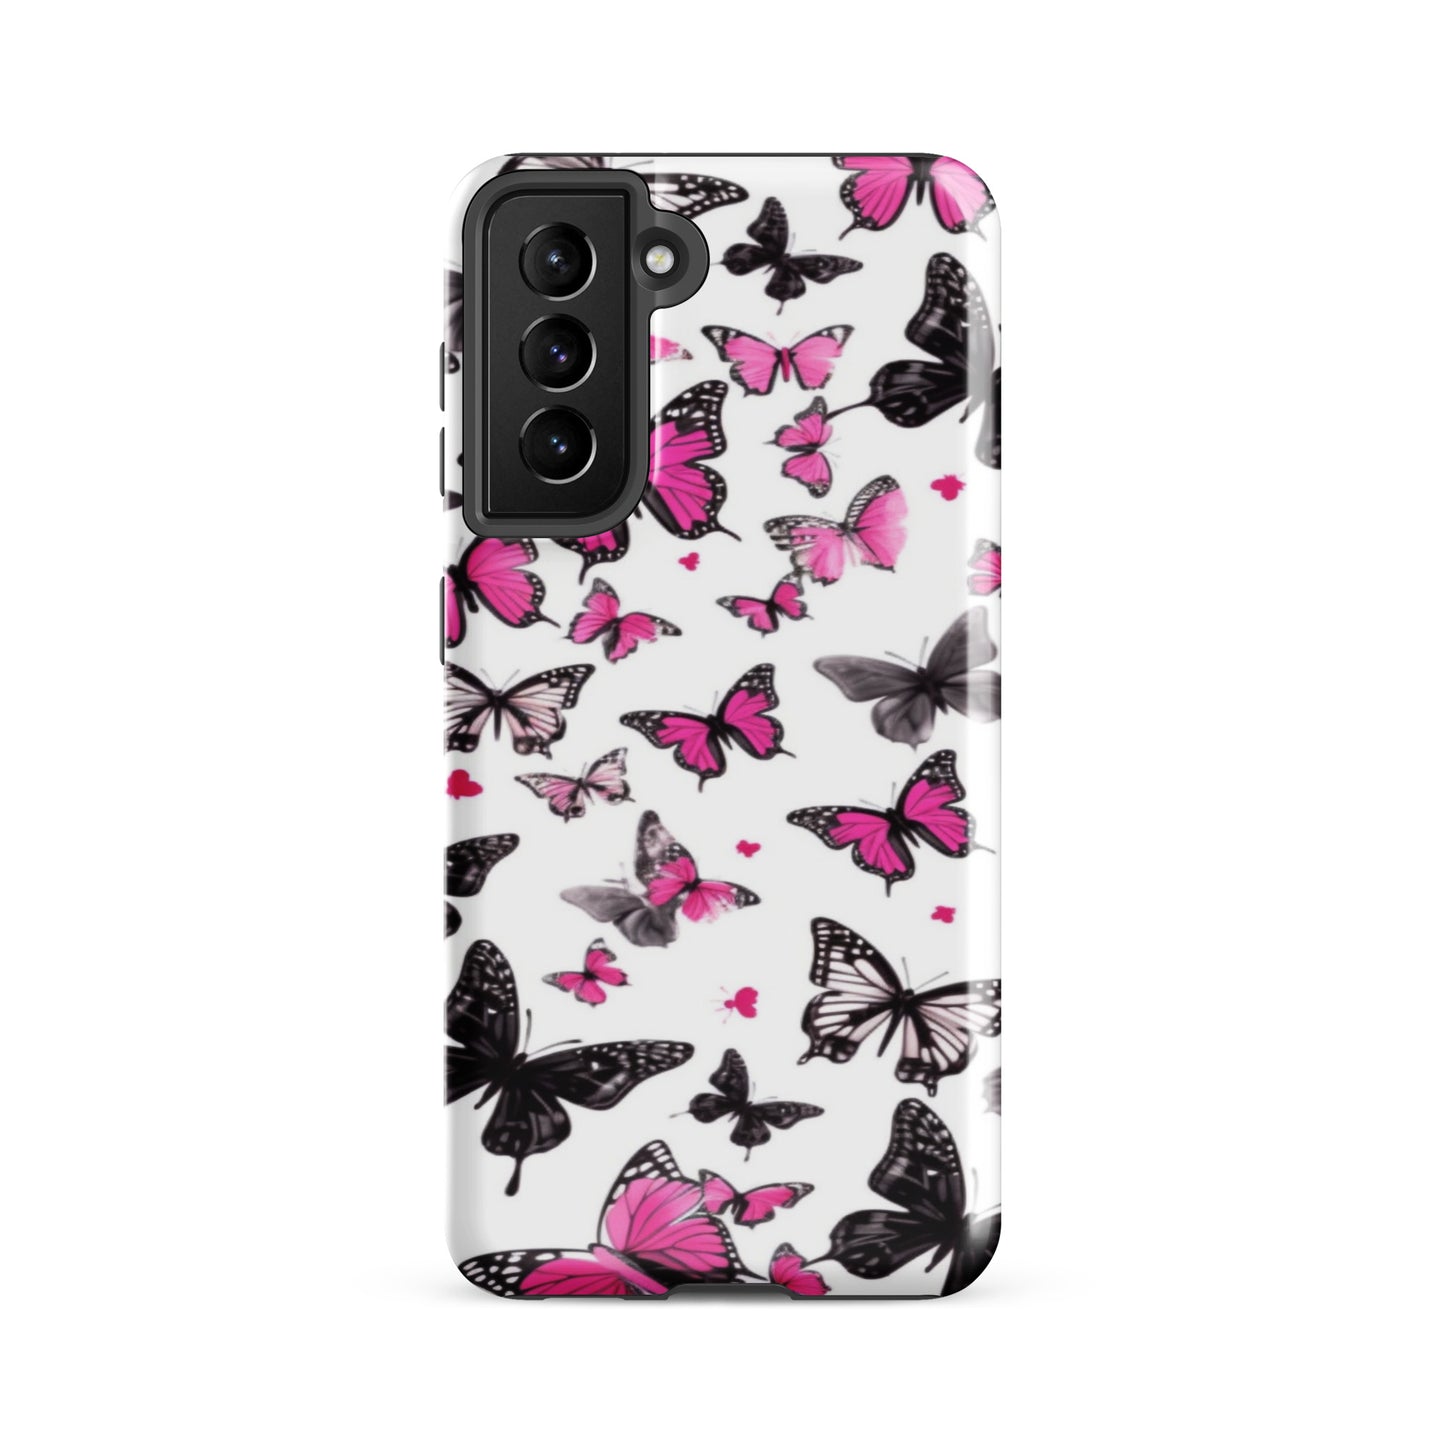 Butterfly Tough Case, Shockproof Phone Case,Cool Designed Phone Cases, Pocket-friendly